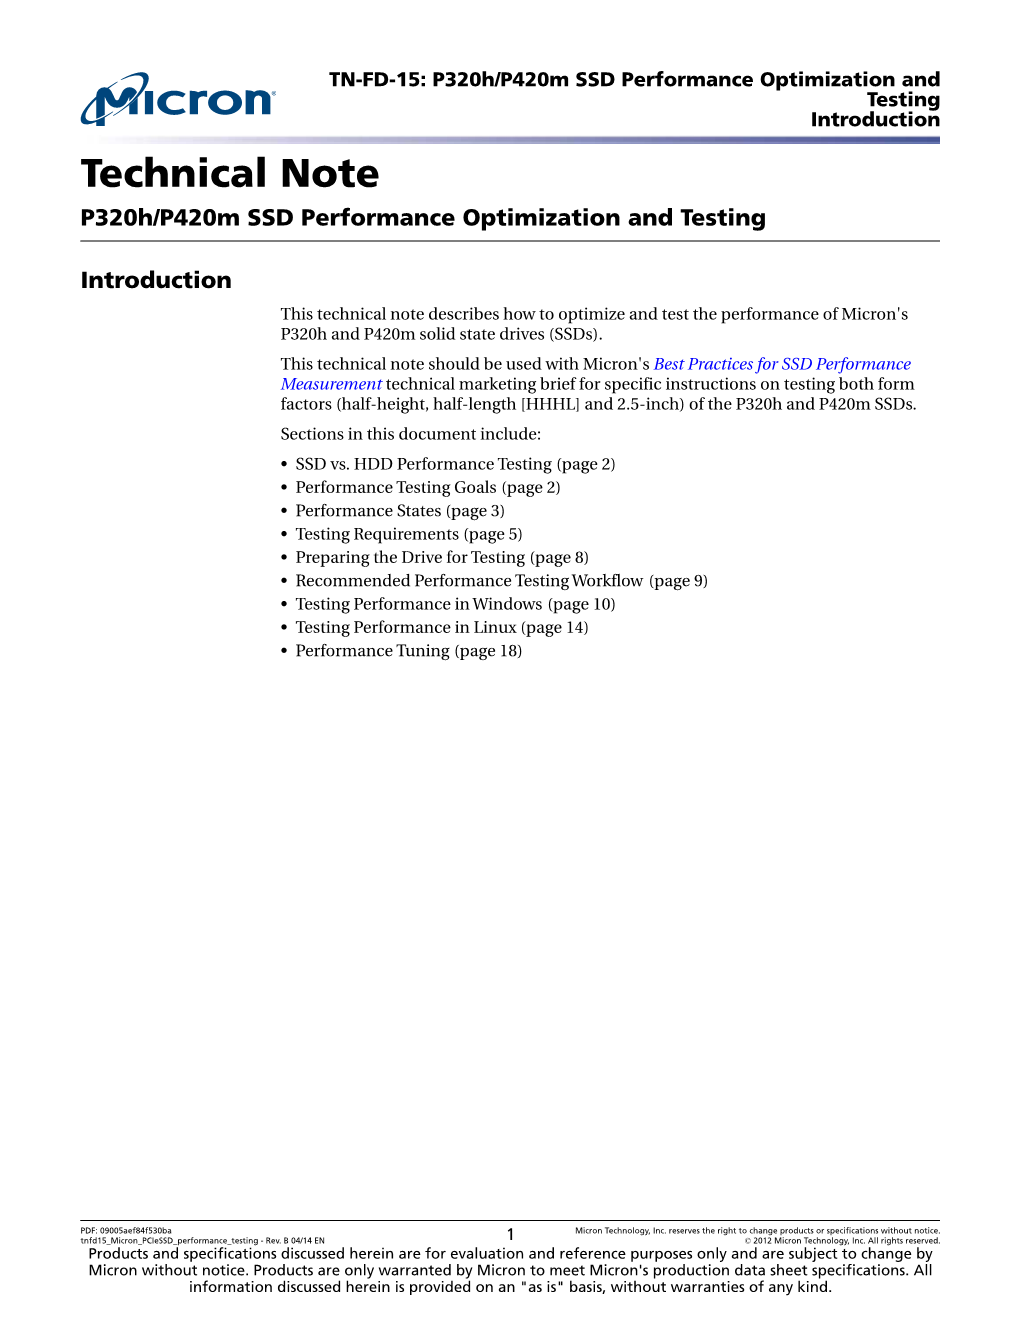 P320h/P420m SSD Performance Optimization and Testing Introduction Technical Note P320h/P420m SSD Performance Optimization and Testing